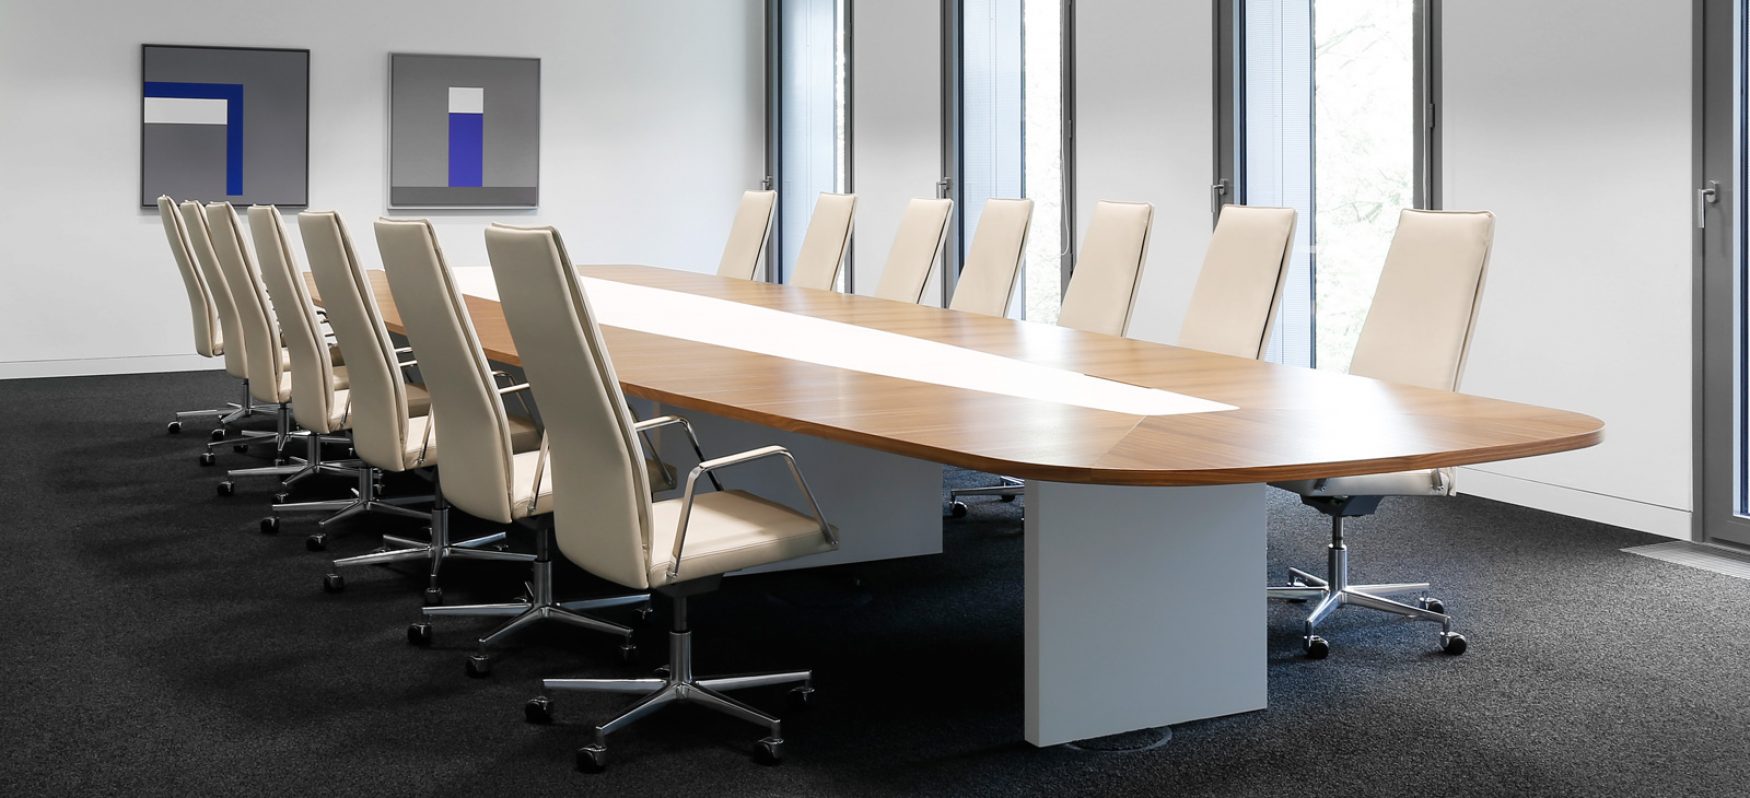 Spiegels Exclusive Conference Table And Furniture For Meeting Meeting And Meeting